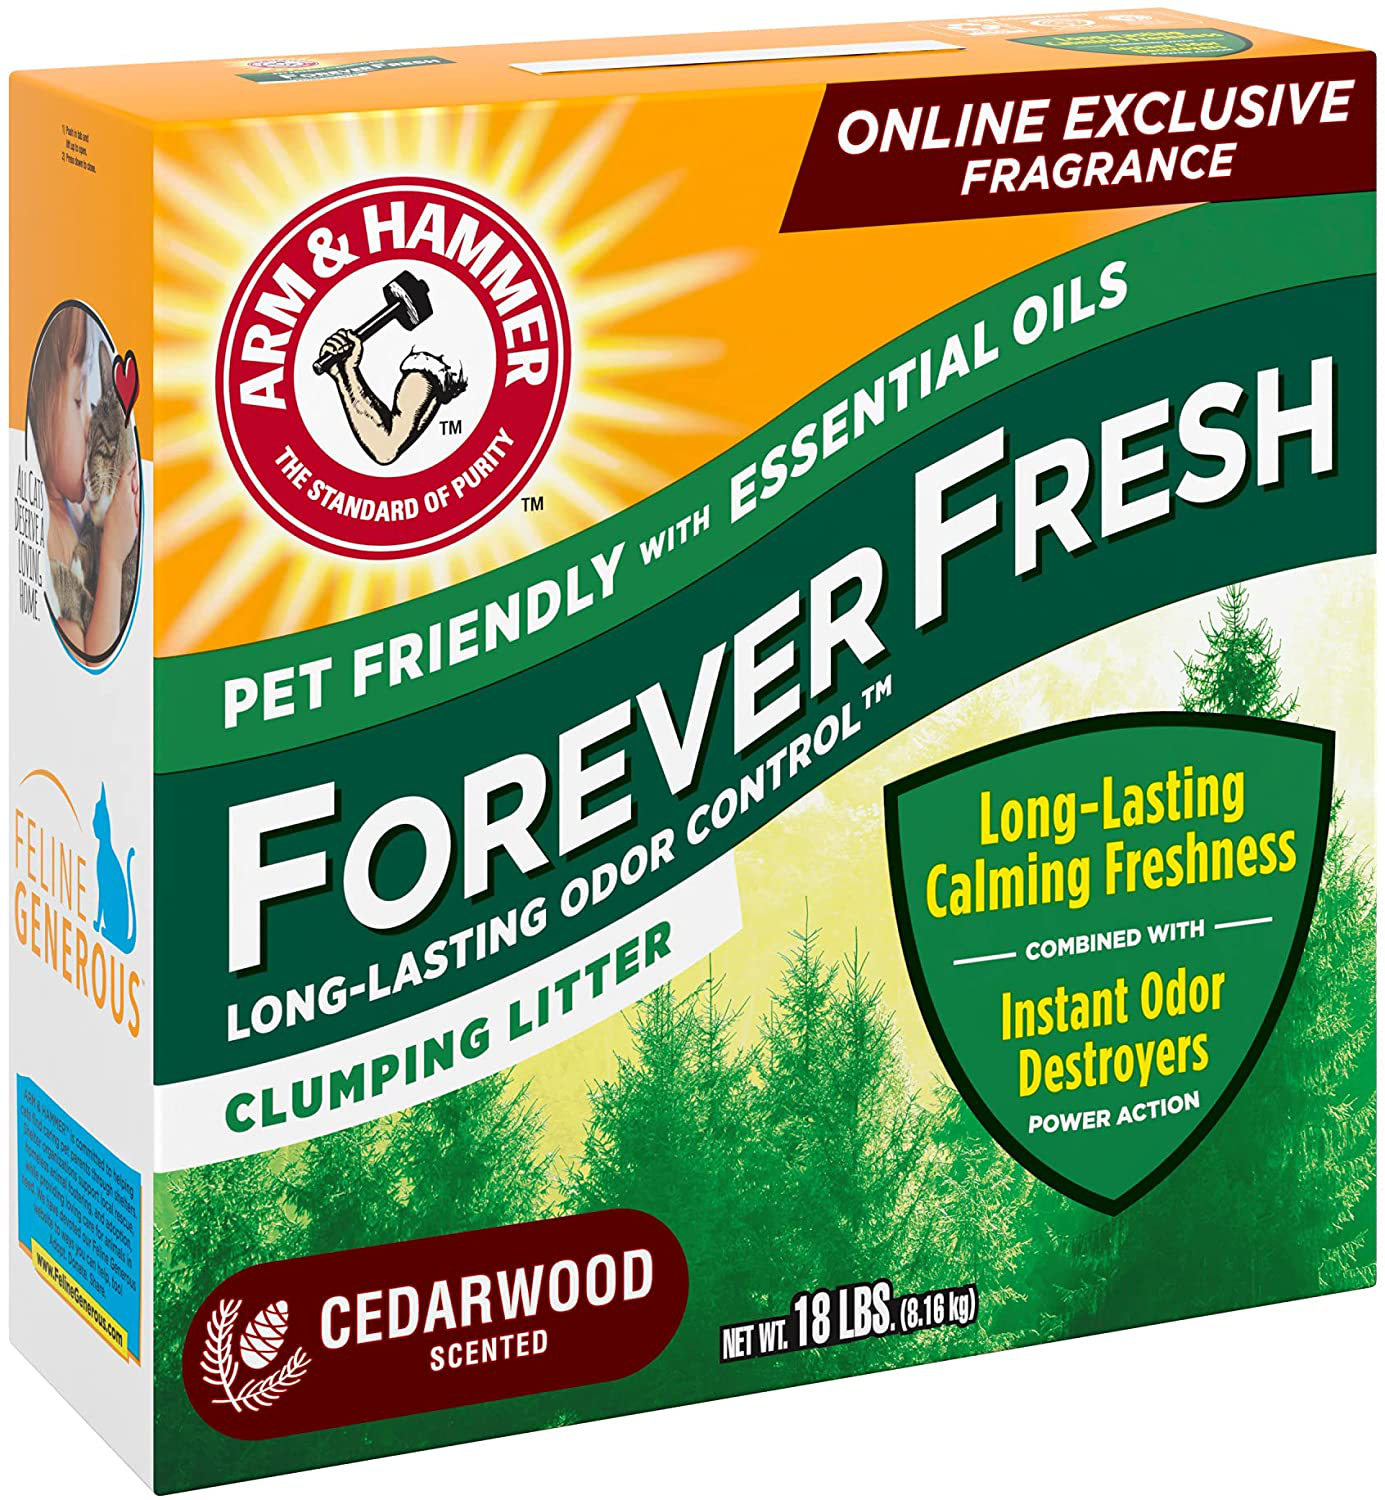 Arm & Hammer Ultra Last Unscented Clumping Cat Litter, Multicat 18Lb, Pet Friendly with Baking Soda